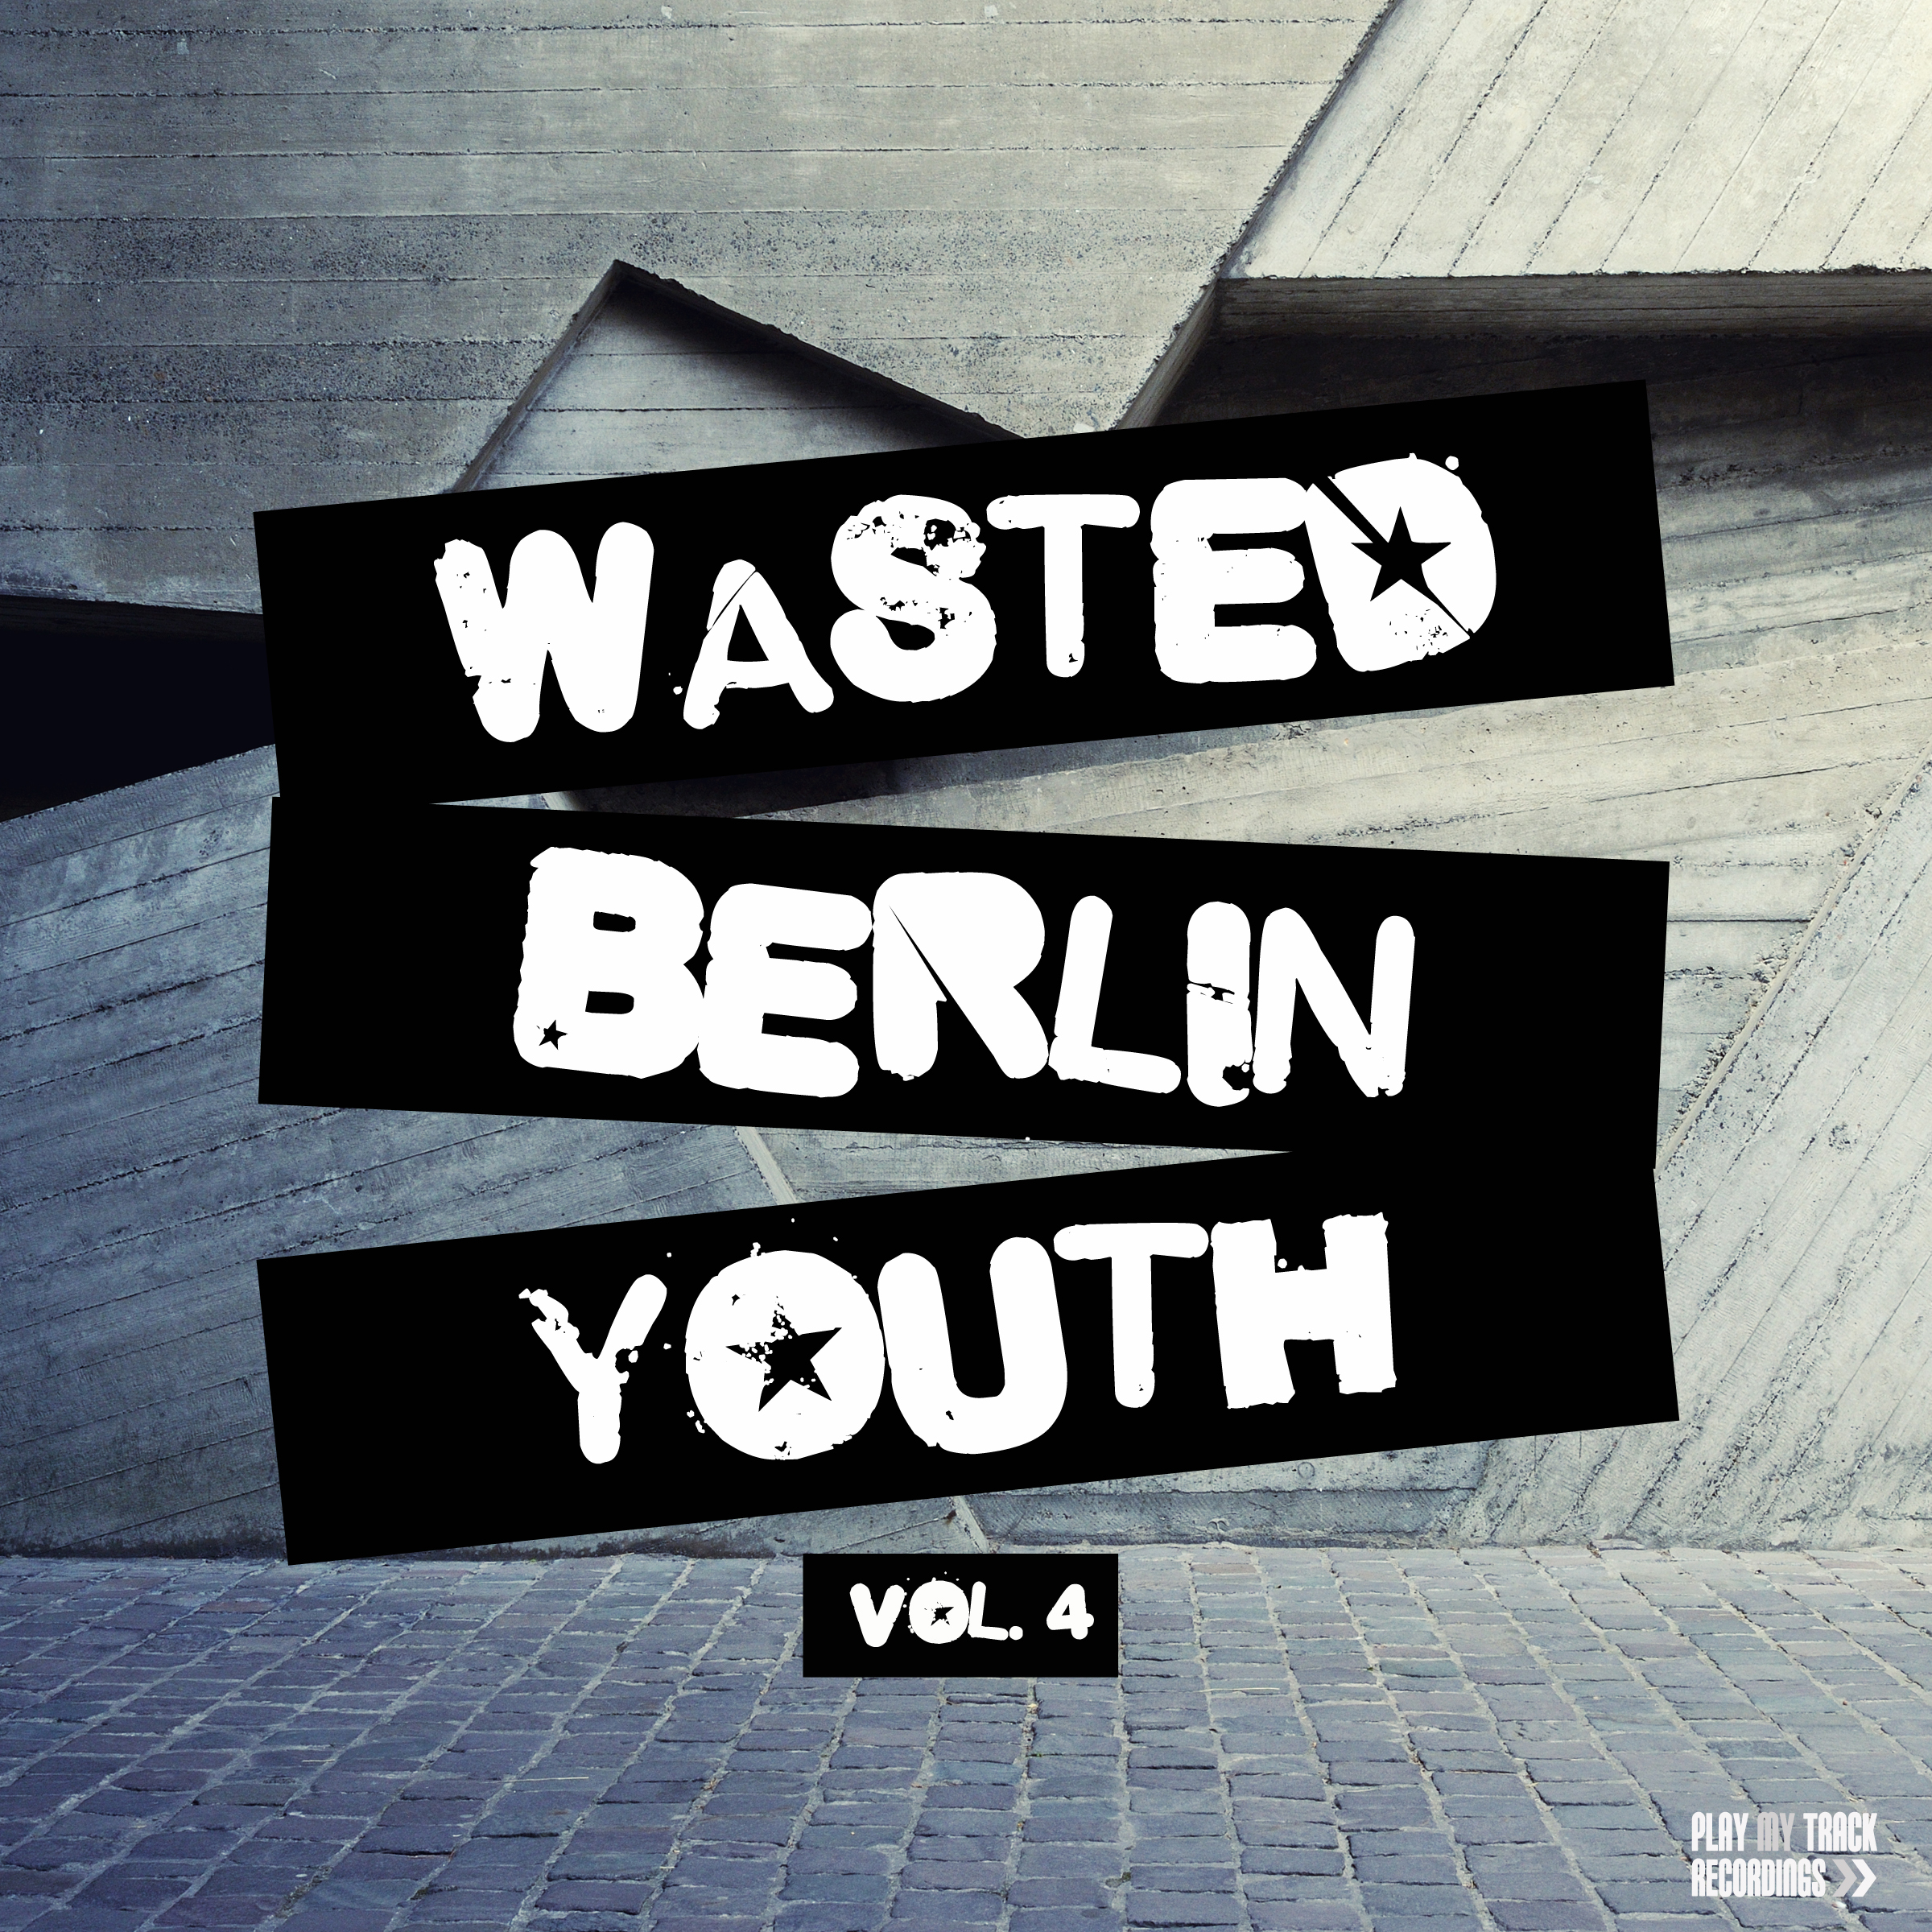 Wasted Berlin Youth, Vol. 4